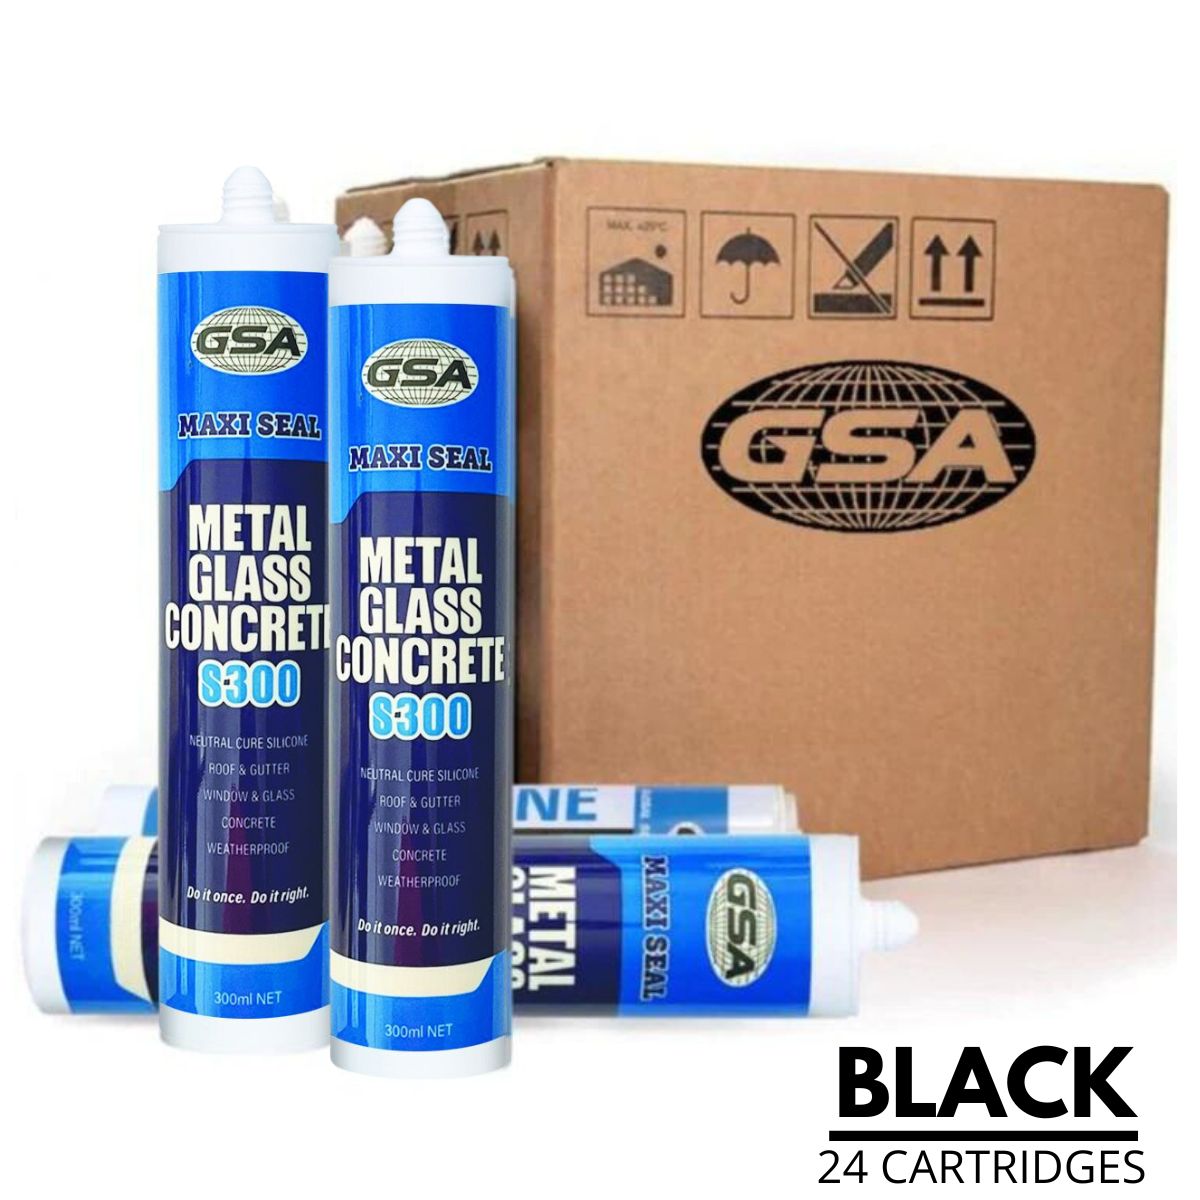 GSA Trade Silicone Neutral Cure S300 Metal Glass Concrete | BLACK | 24 CARTRIDGES - South East Clearance Centre